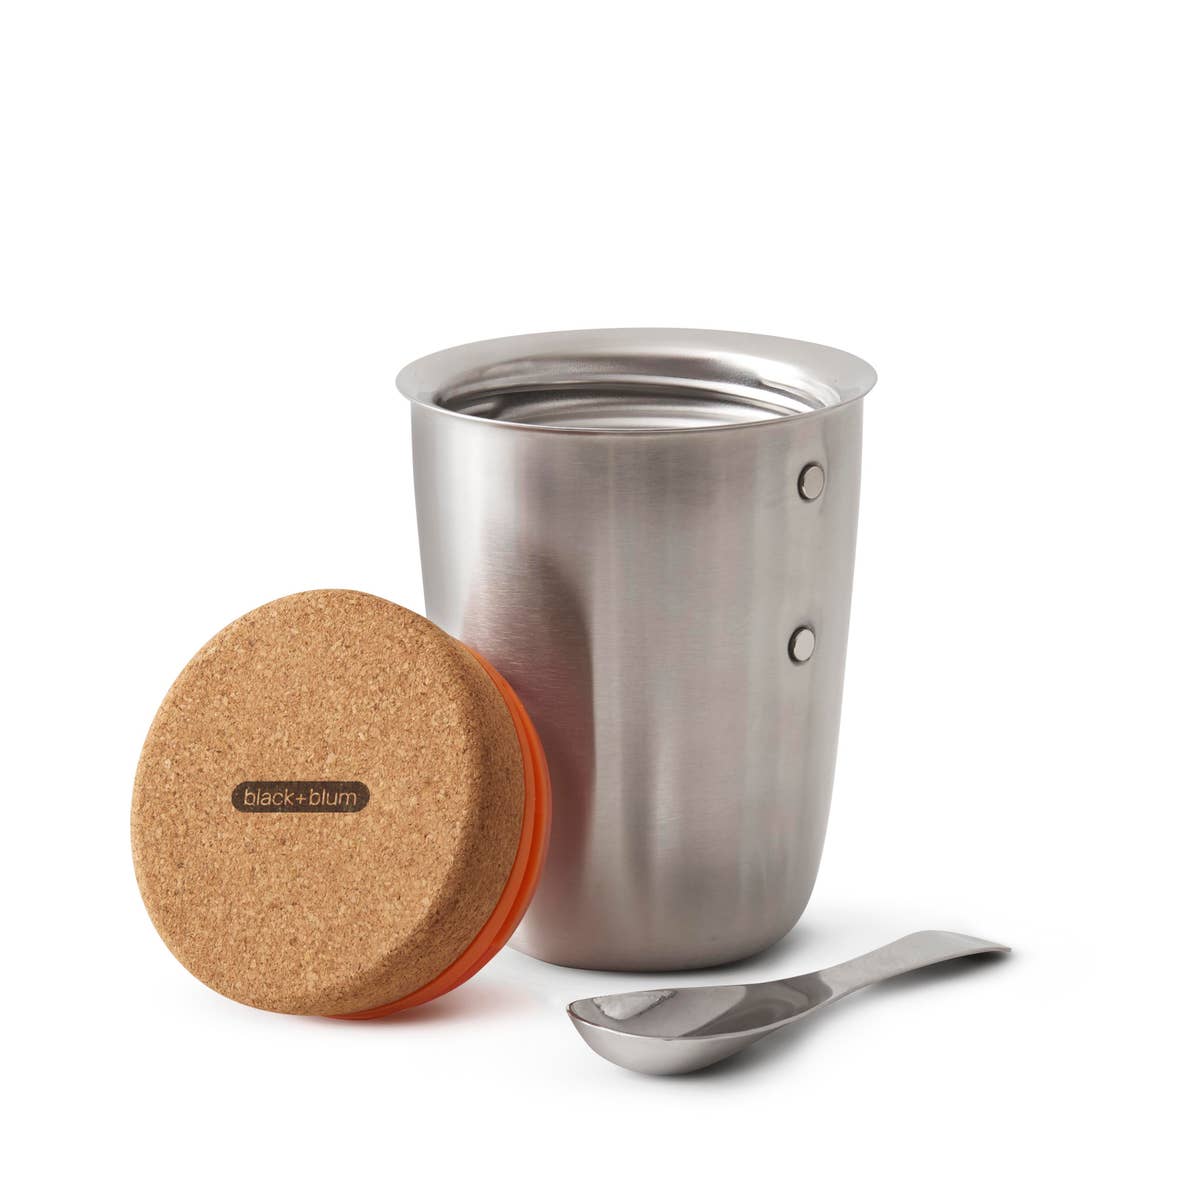 https://defiancegearco.com/cdn/shop/products/black-blum-thermo-pot-stainless-steel-cork-top-vacuum-sealed-insulated-thermos-soup-lunch-food-travel-container-with-magnetic-spoon-attachment-37148941091030.jpg?v=1648475017&width=1200